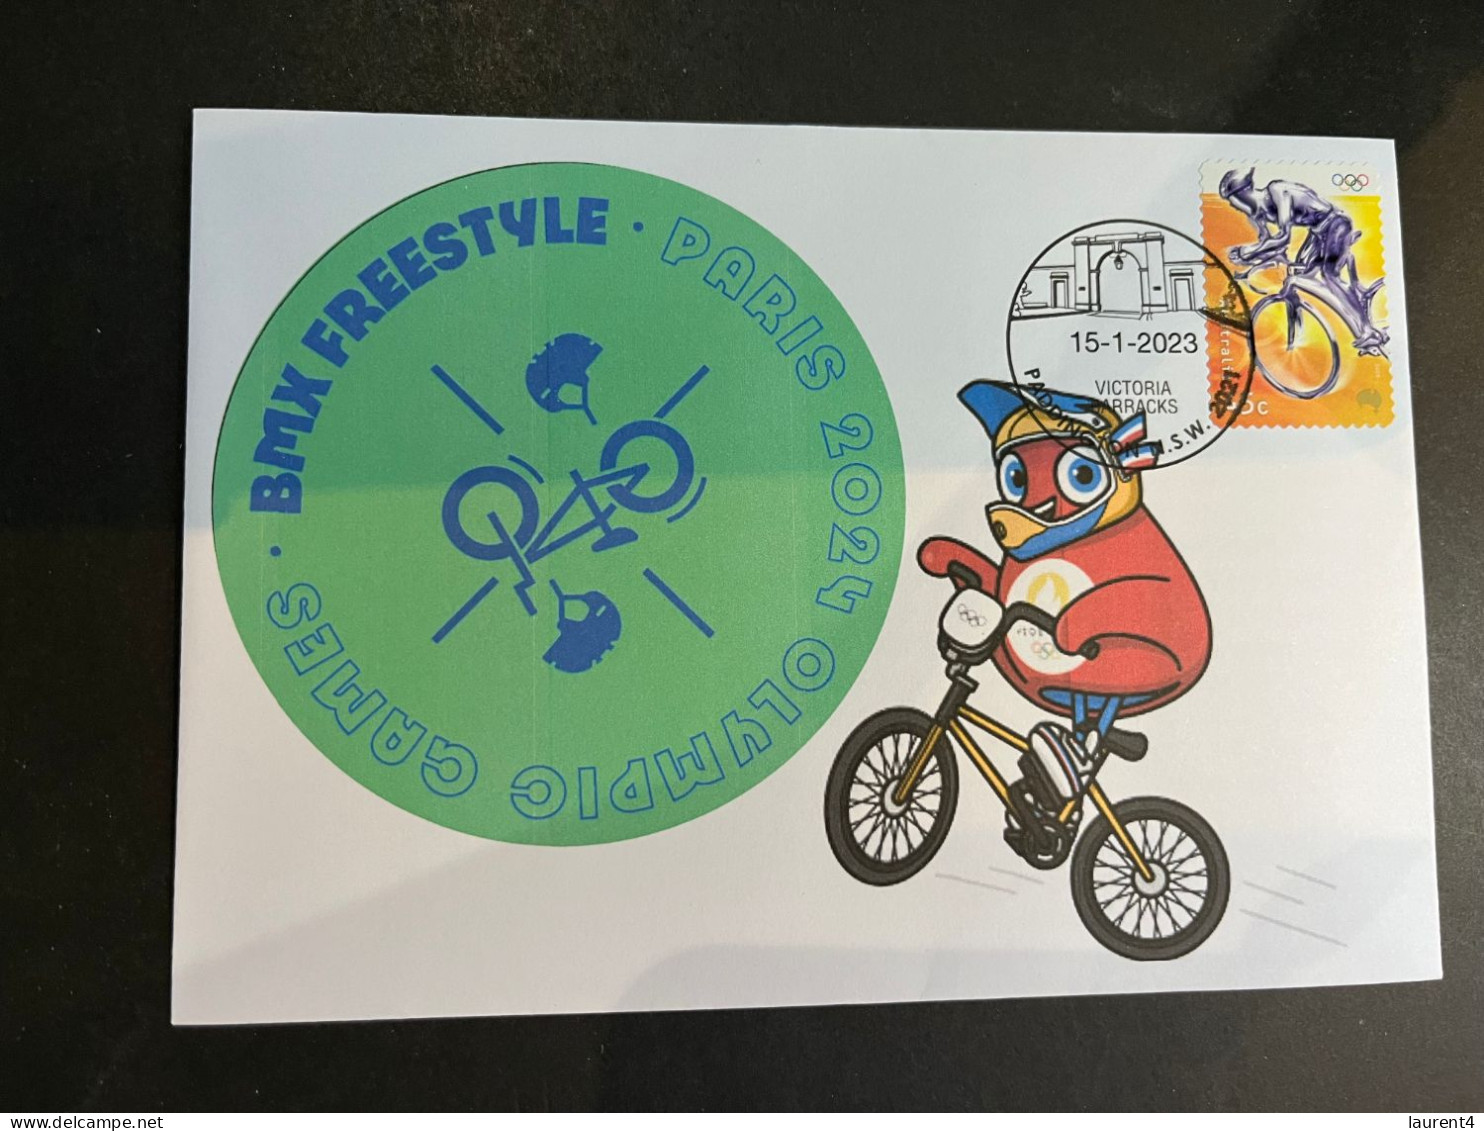 (1 R 42) Paris 2024 Olympics Games - BMX Freestyle Cycling (with 2000 Sydney Olympic Cycling Stamp P/s) - Verano 2024 : París